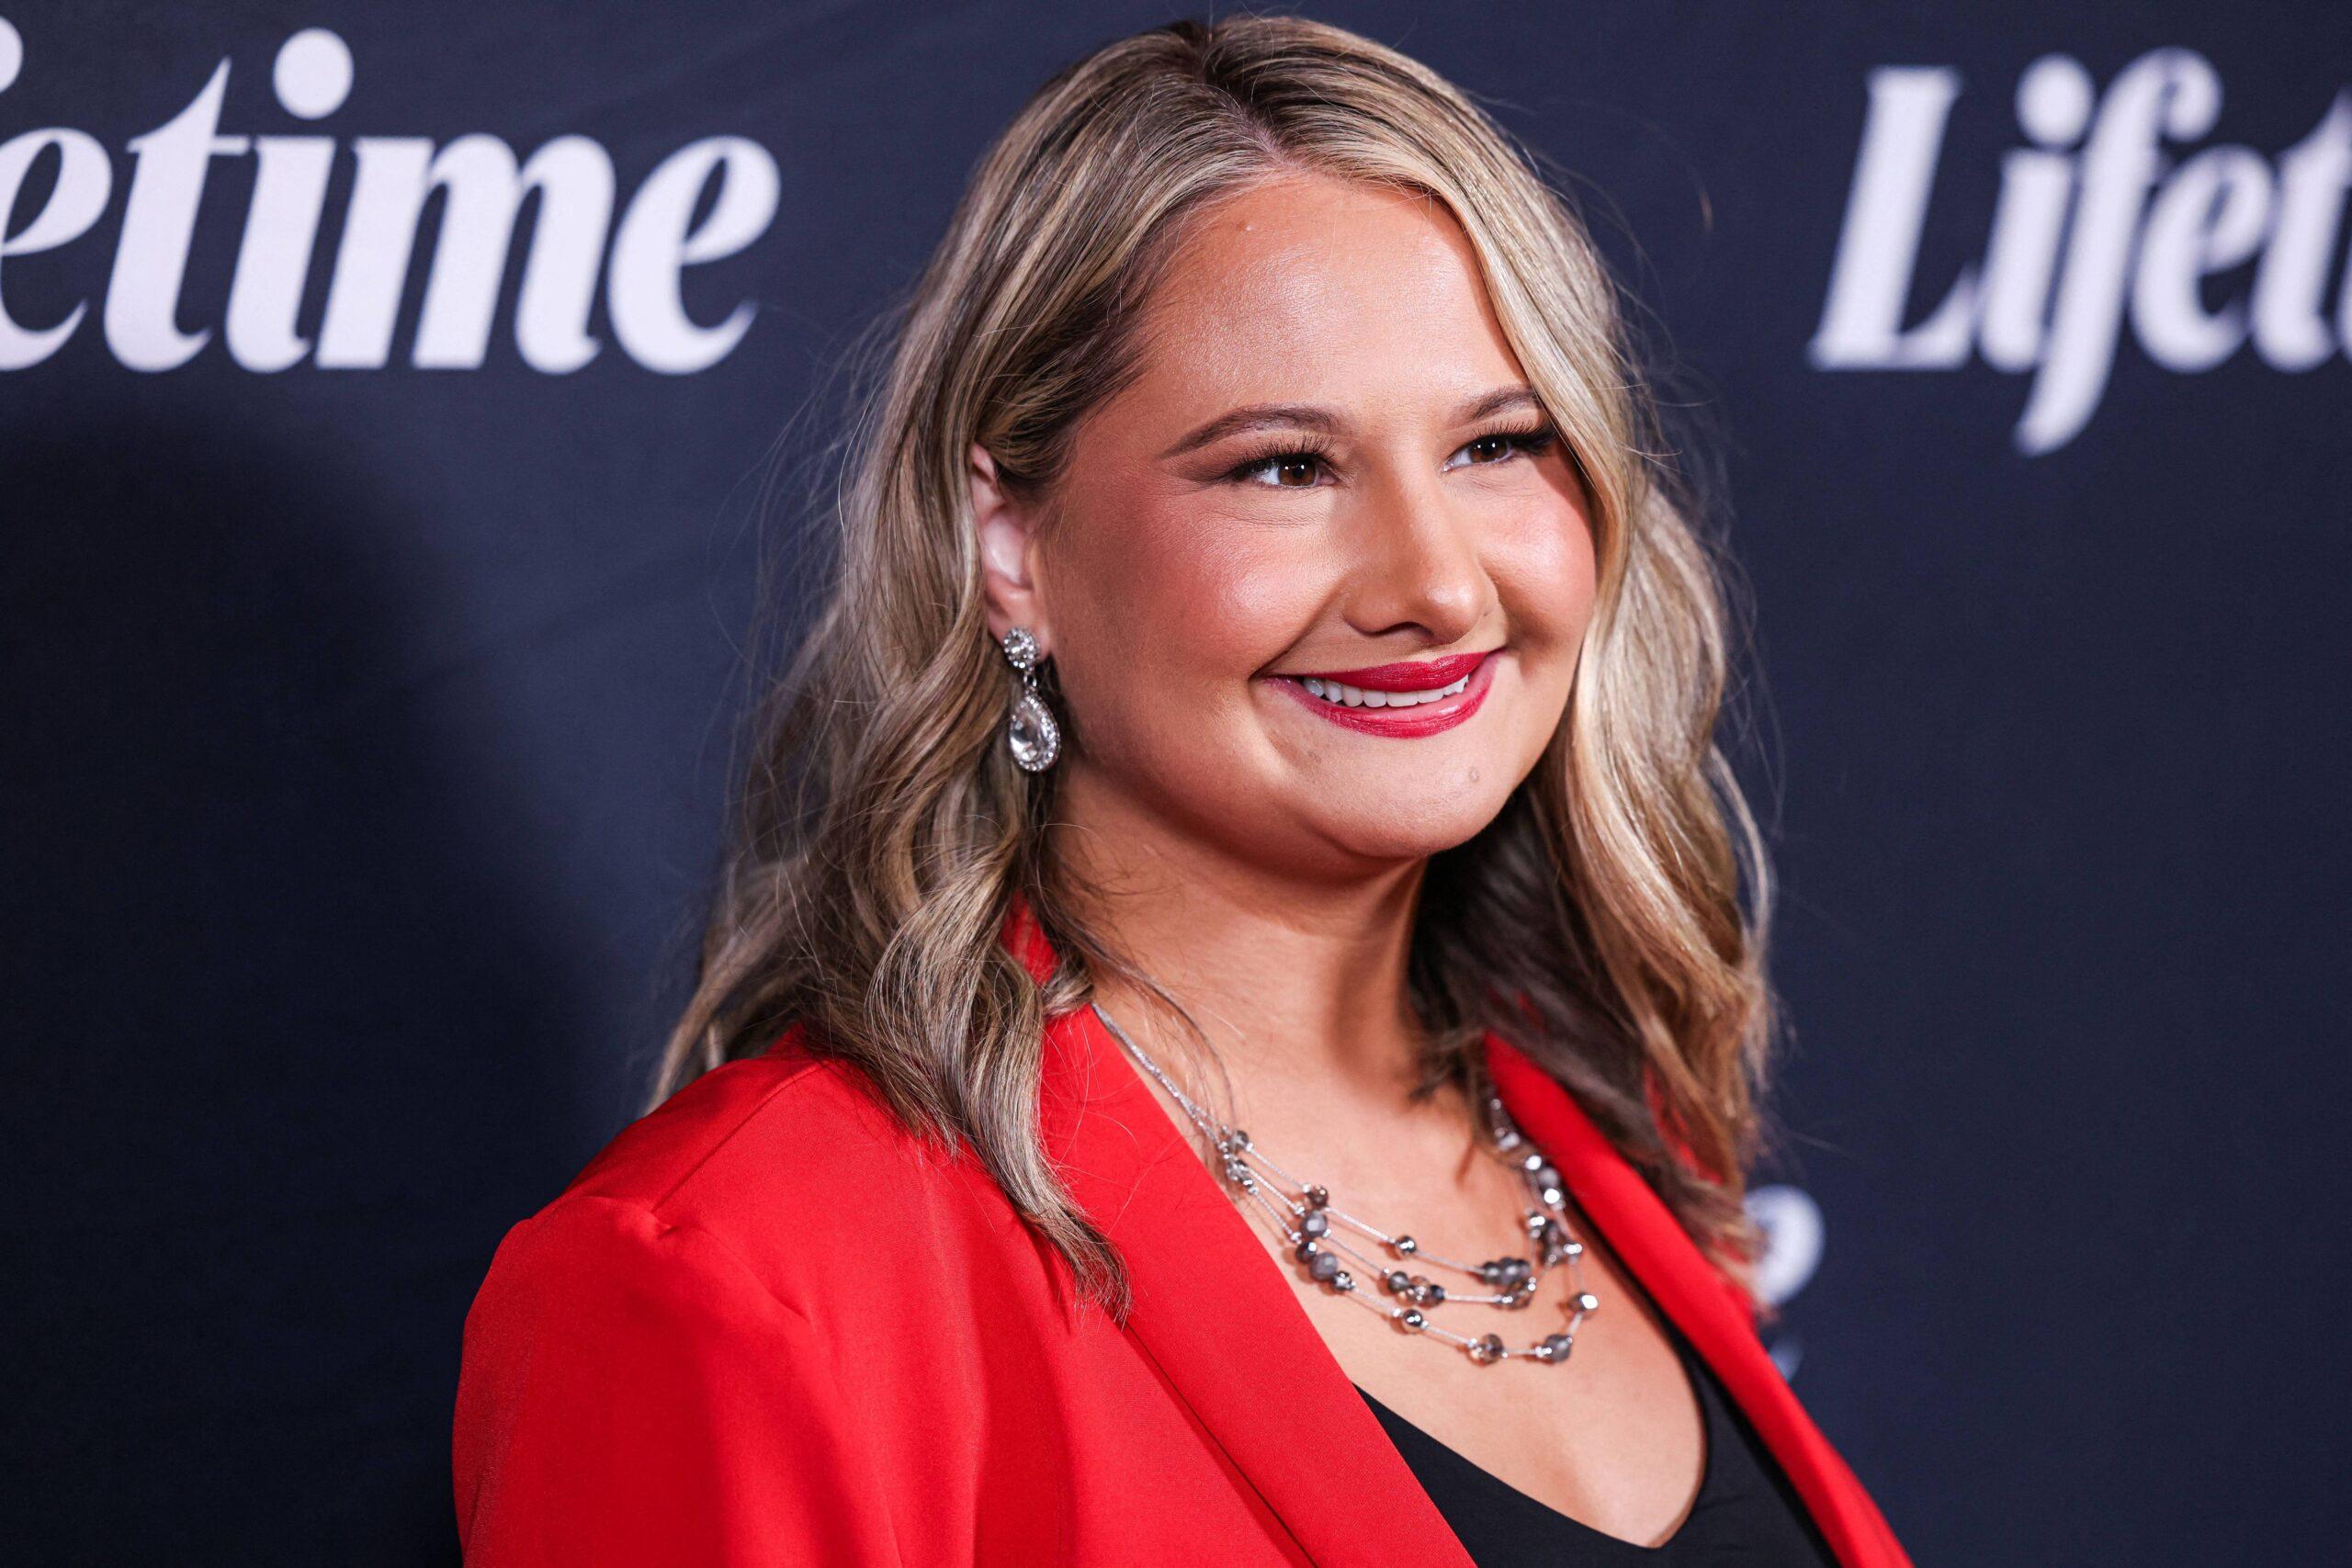 Gypsy Rose Blanchard at Lifetime premiere